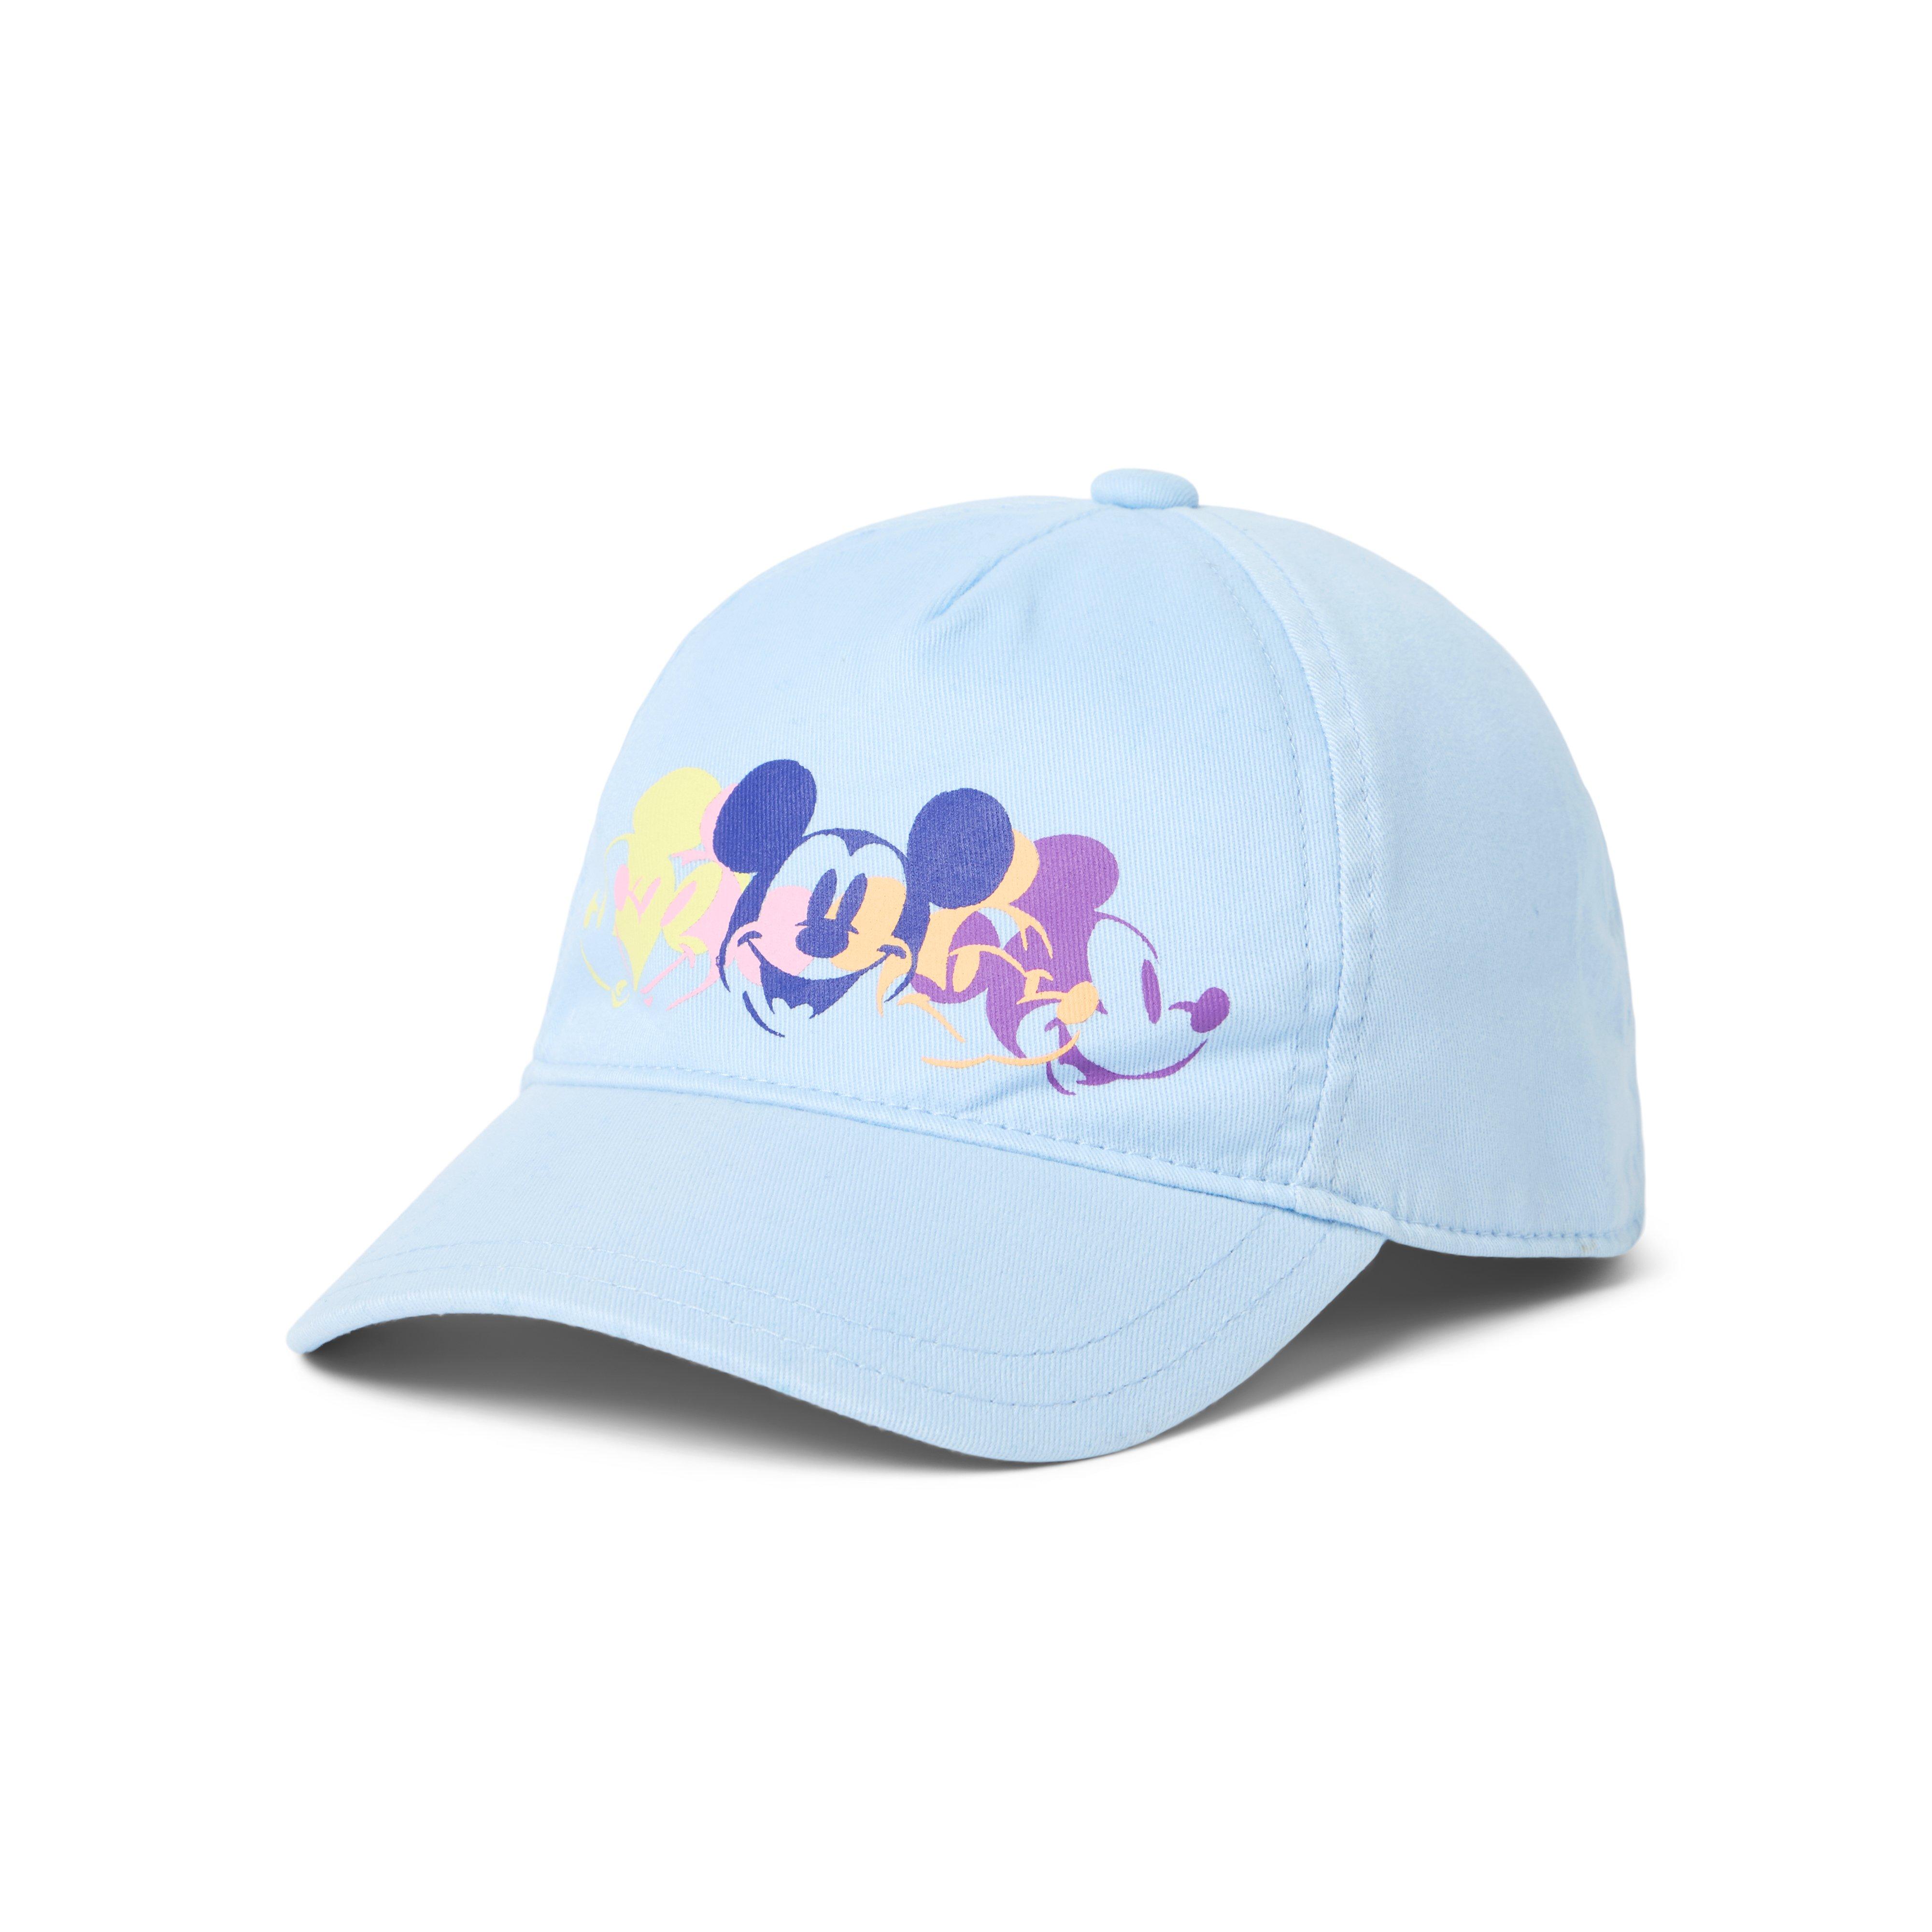 Disney Mickey Mouse Cap image number 0